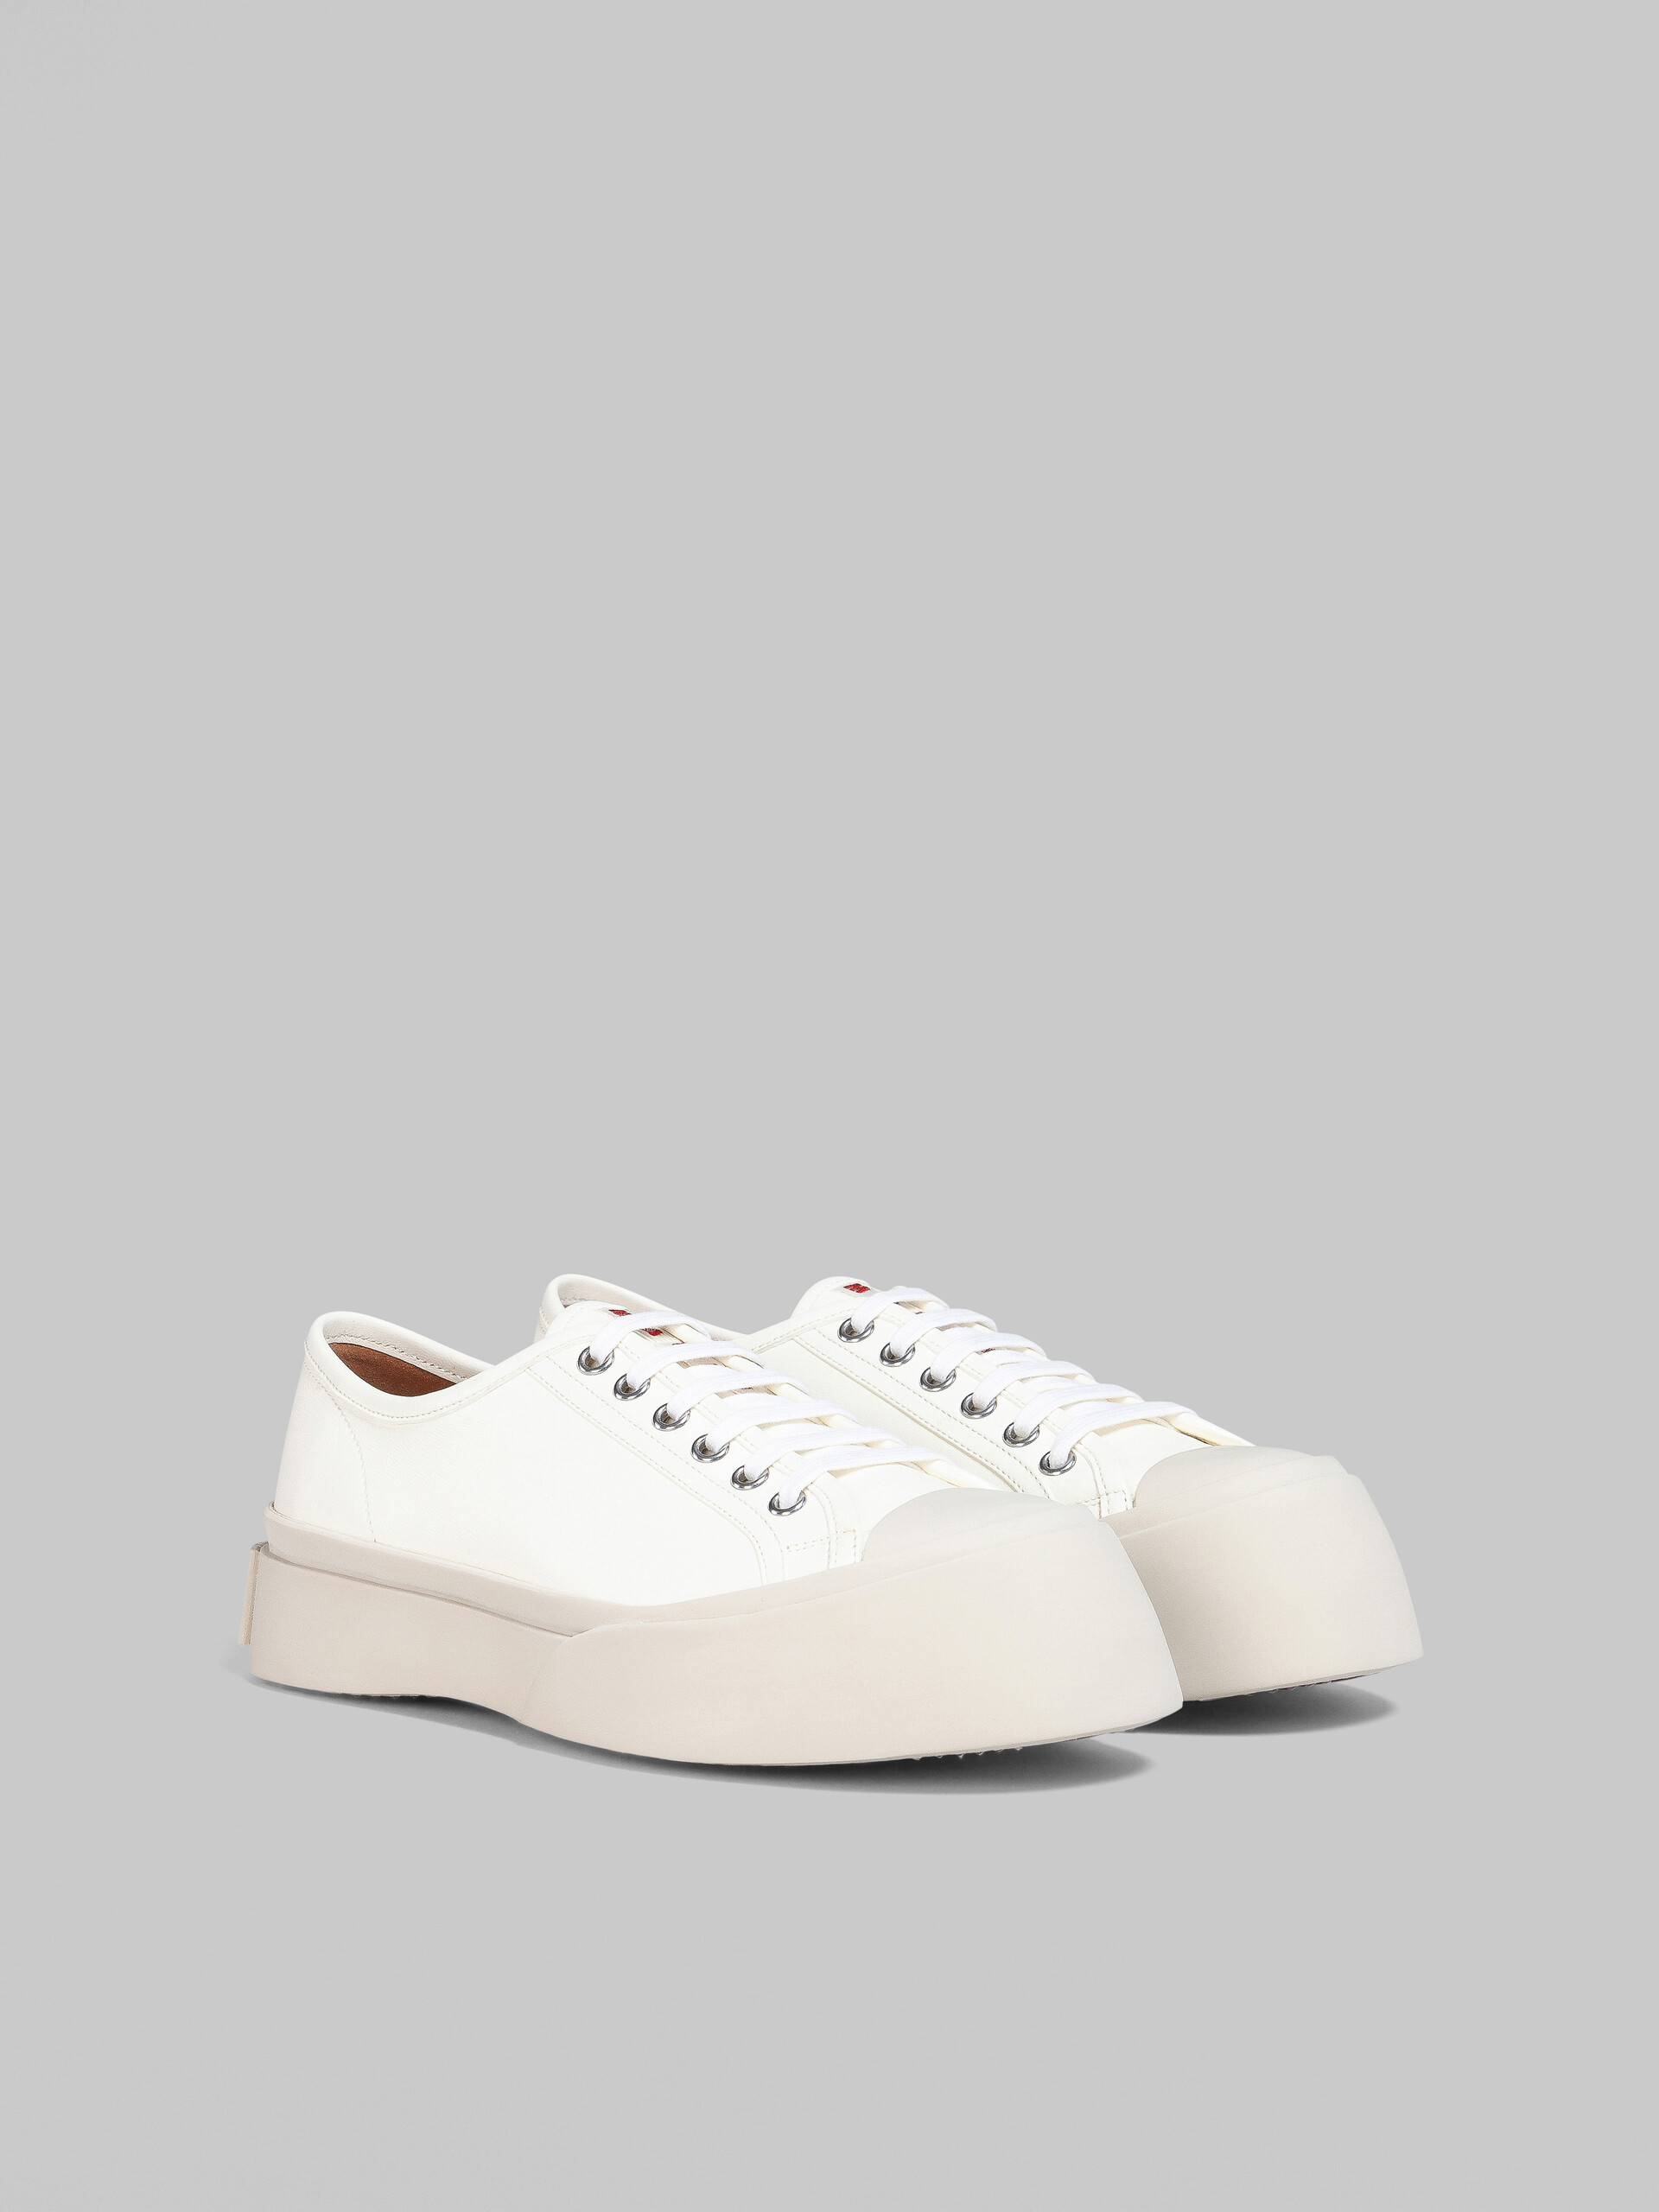 White nappa leather Pablo lace-up sneaker - Sneakers - Image 2